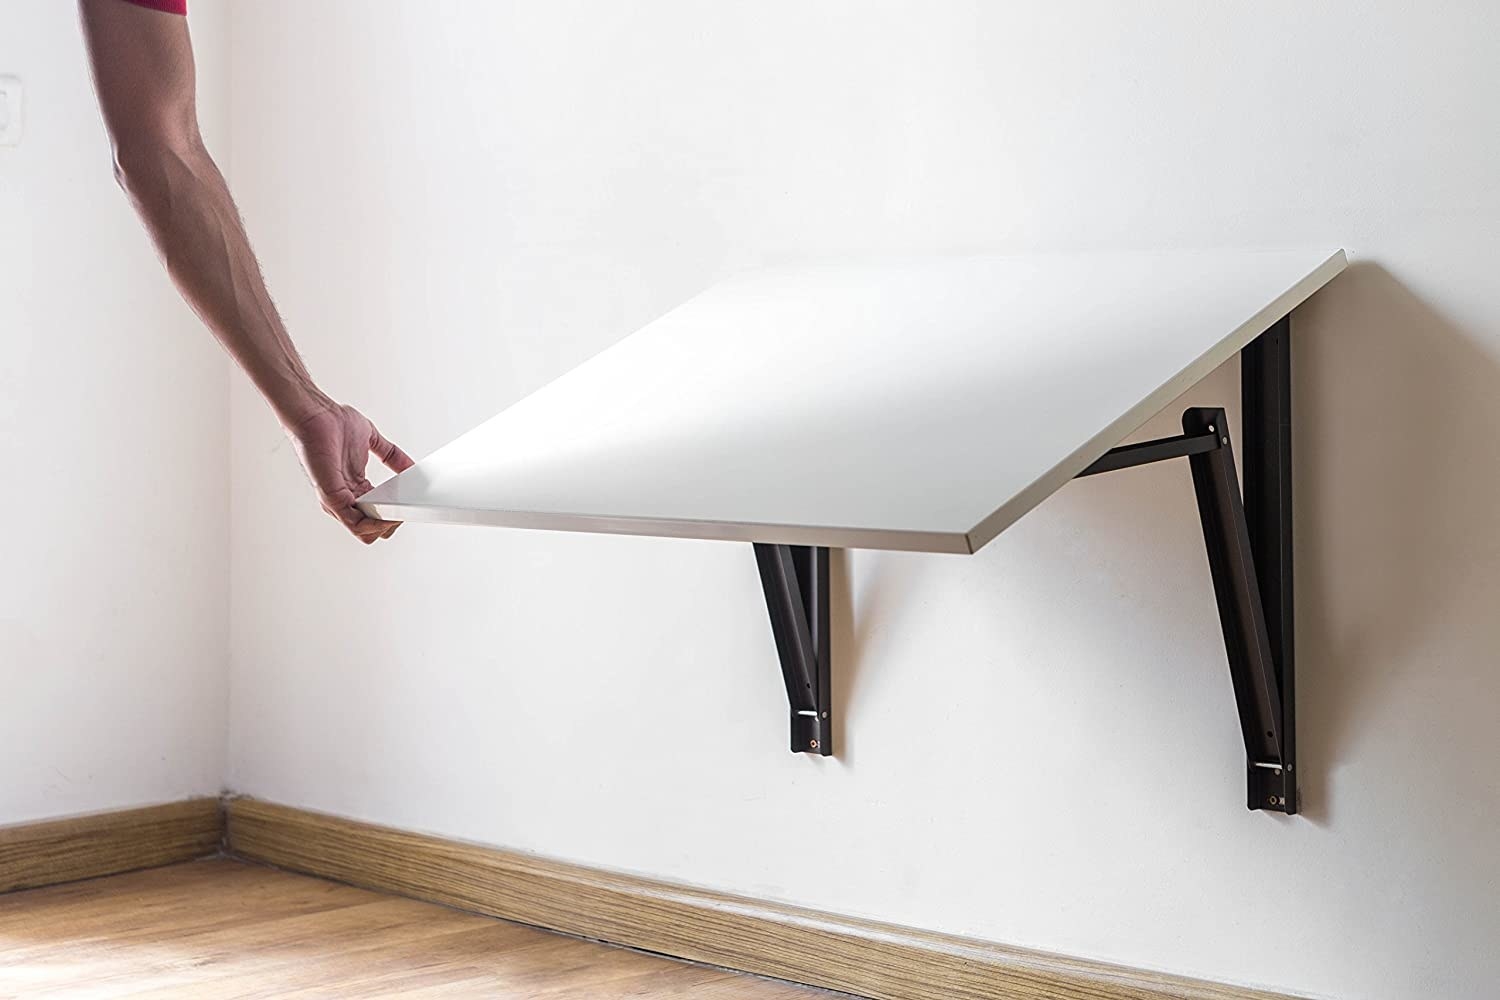 A white foldable table being put back into place by an arm 